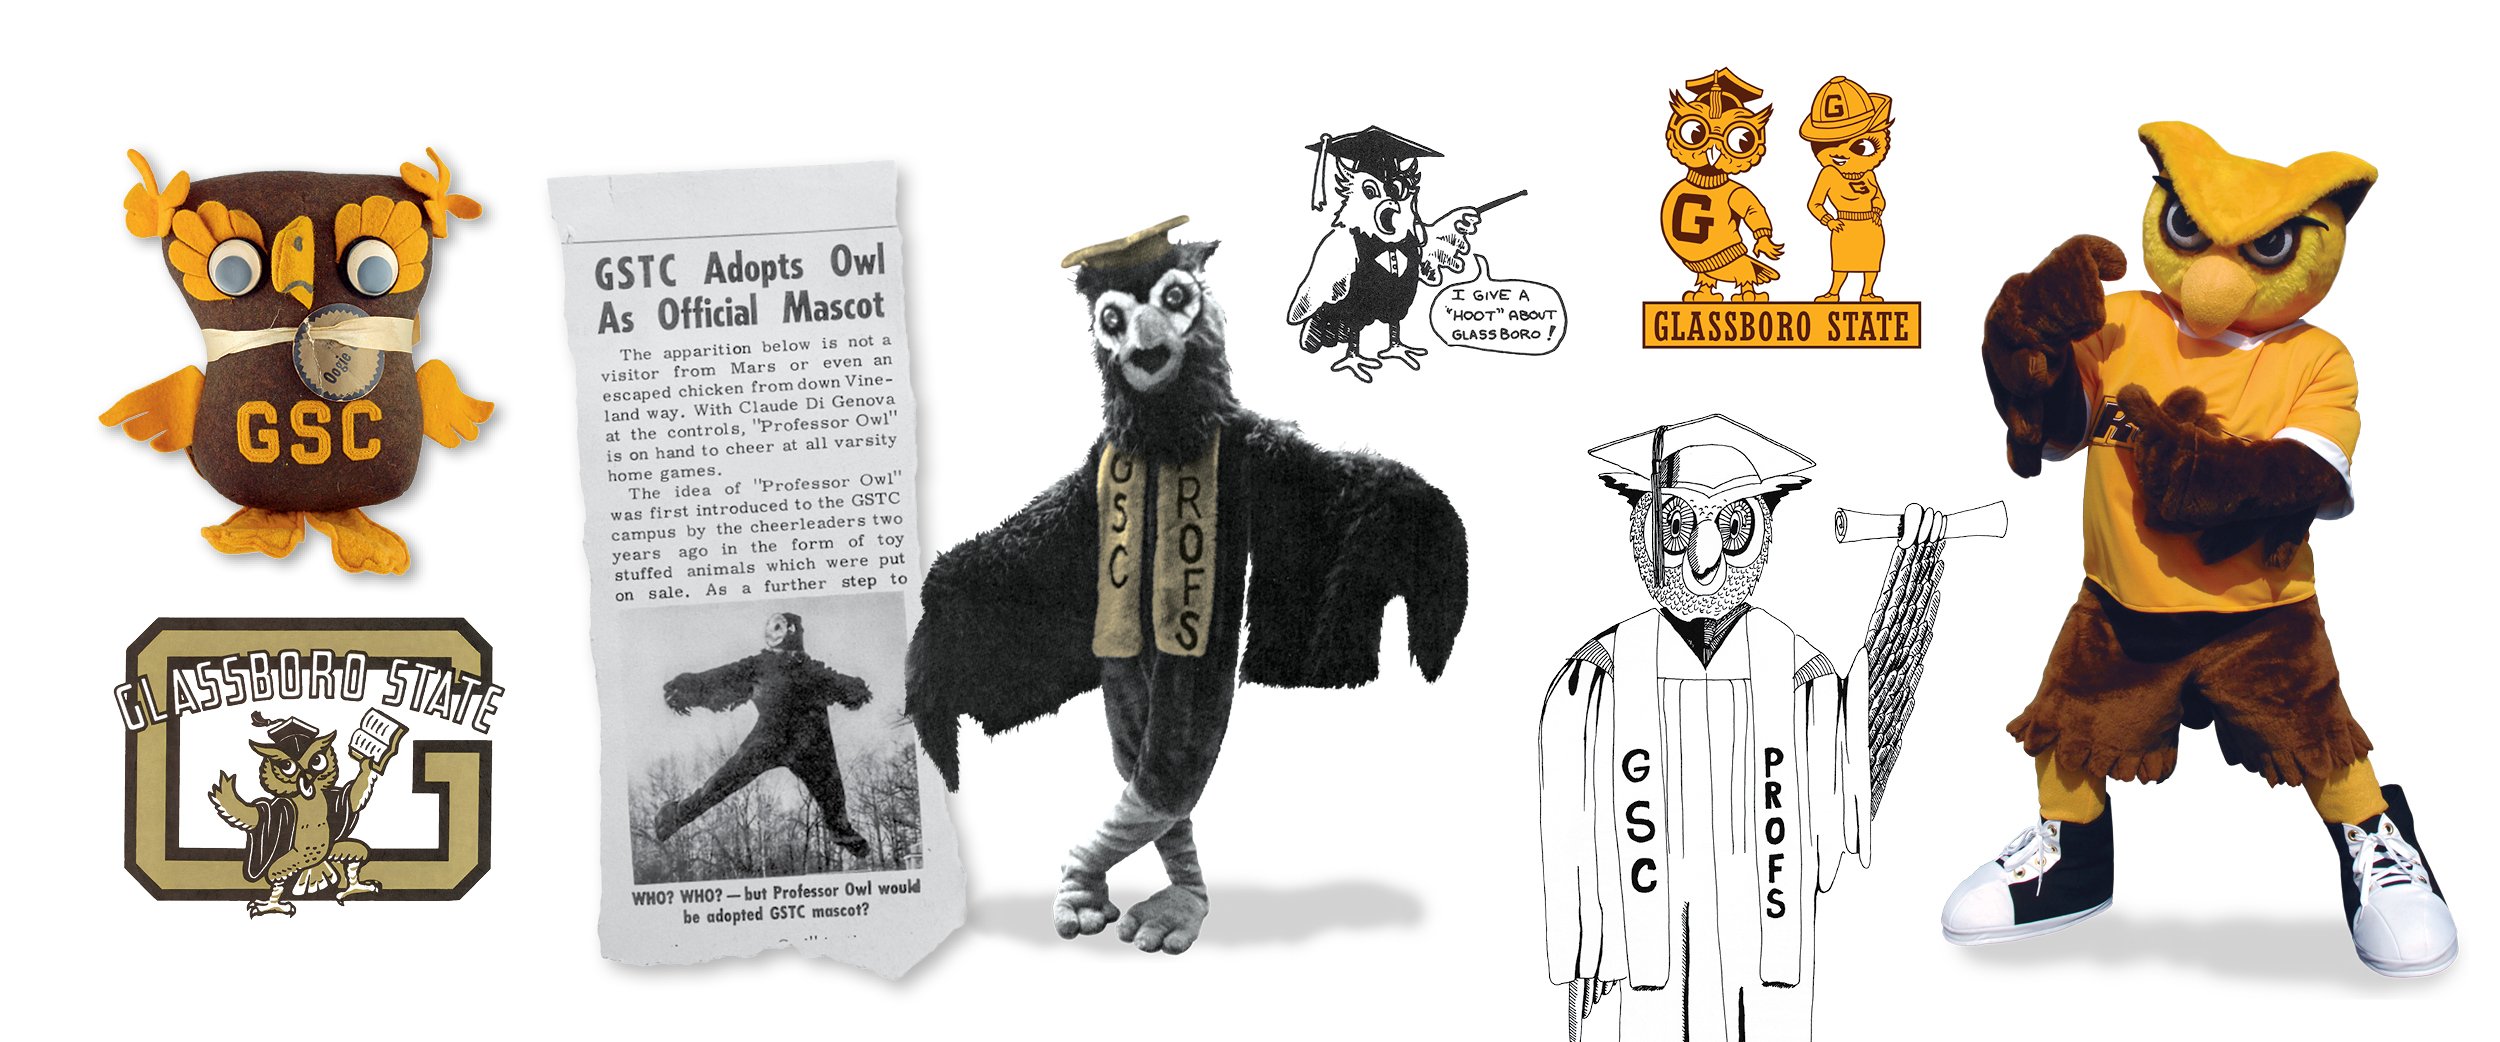 Newspaper clipping announcing Glassboro State Teachers College choosing an owl as the official mascot and drawings of different owls and mascot costumes through the years.